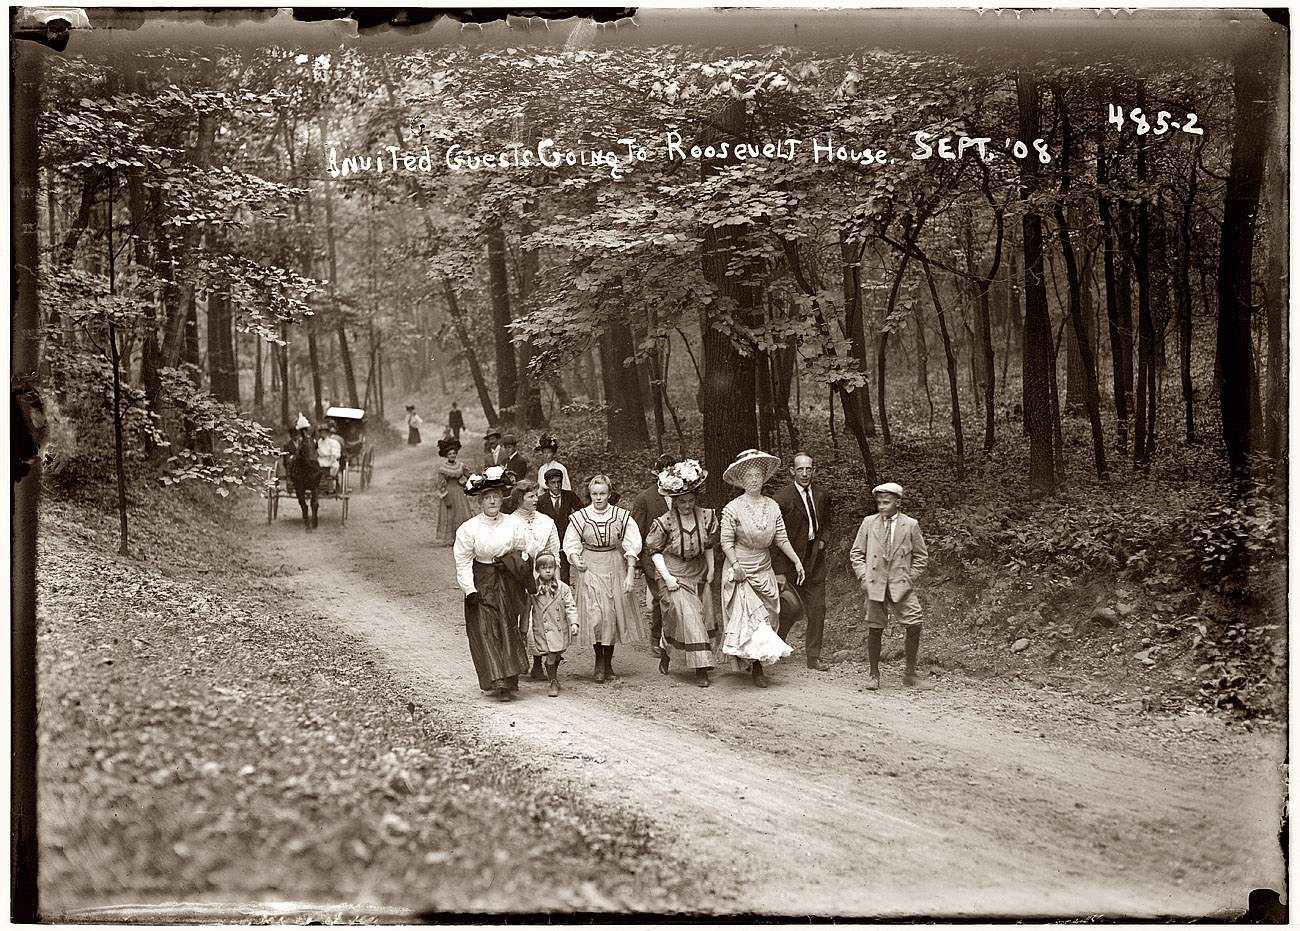 September 1908. "Invited guests going to Roosevelt house on foot and by carriage" at Sagamore Hill, the president's estate near Oyster Bay, Long Island. View full size. 5x7 glass negative, George Grantham Bain Collection.